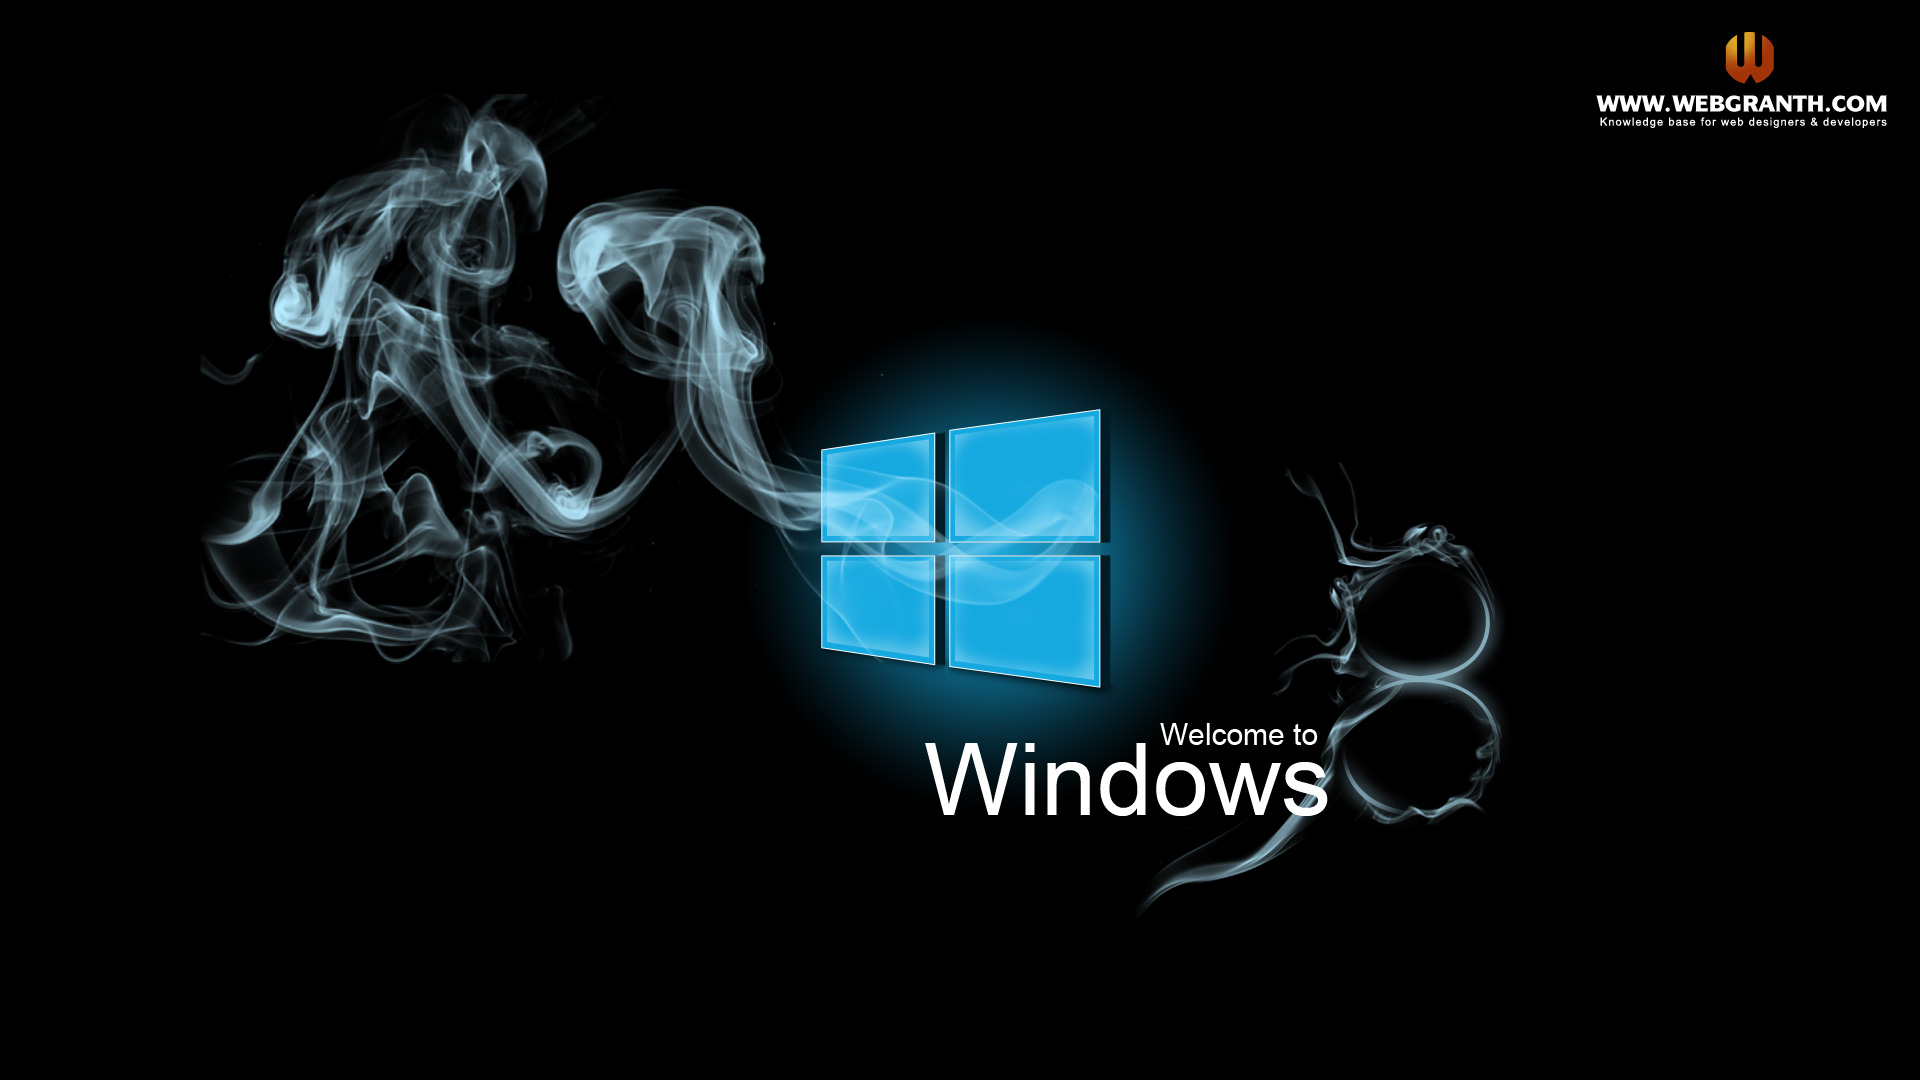 Free Windows 8 Wallpaper Backgrounds 2 View HD Image of Free